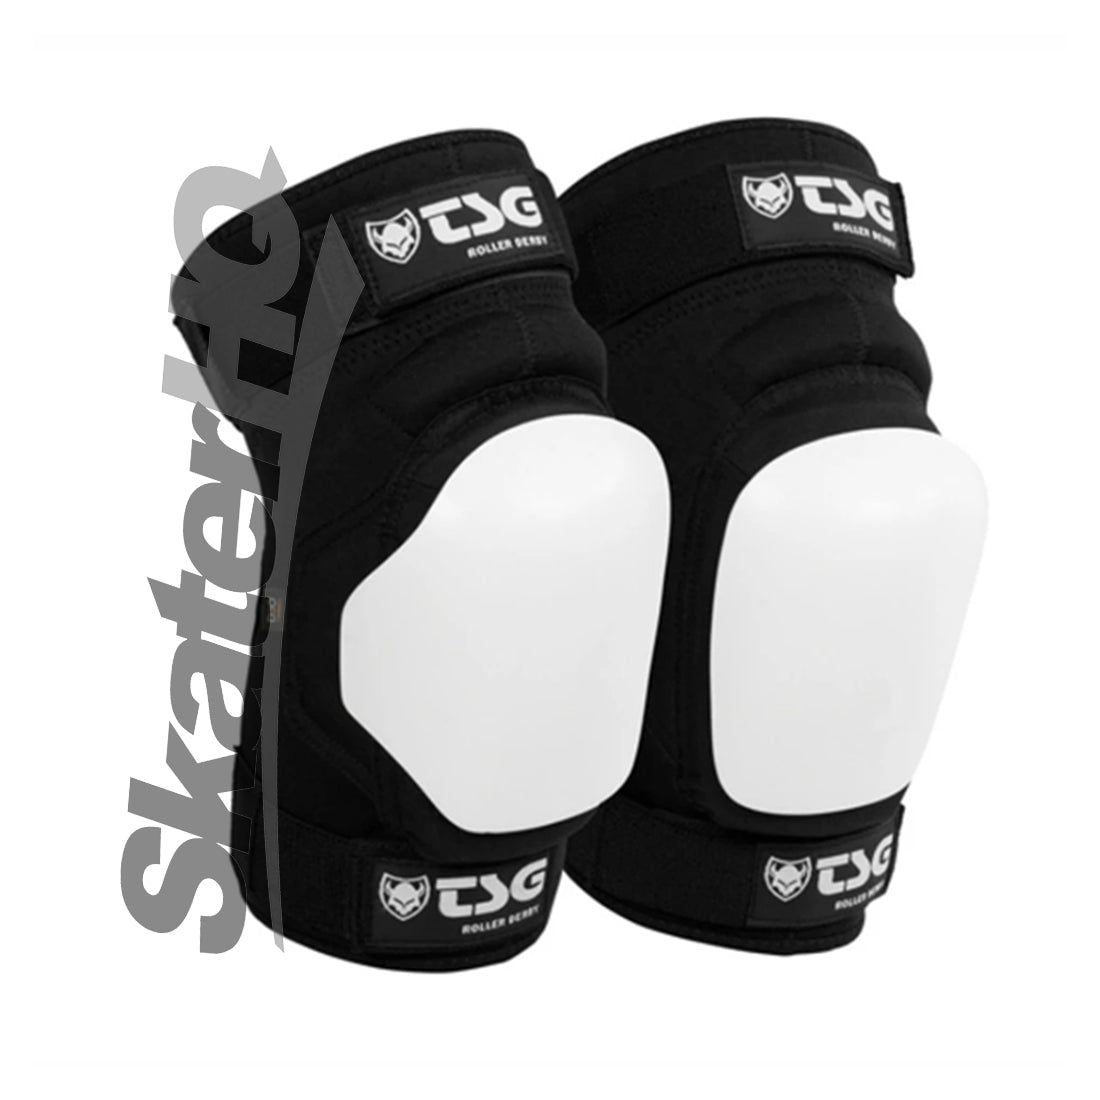 TSG Rollerderby Knee - XLarge Protective Gear